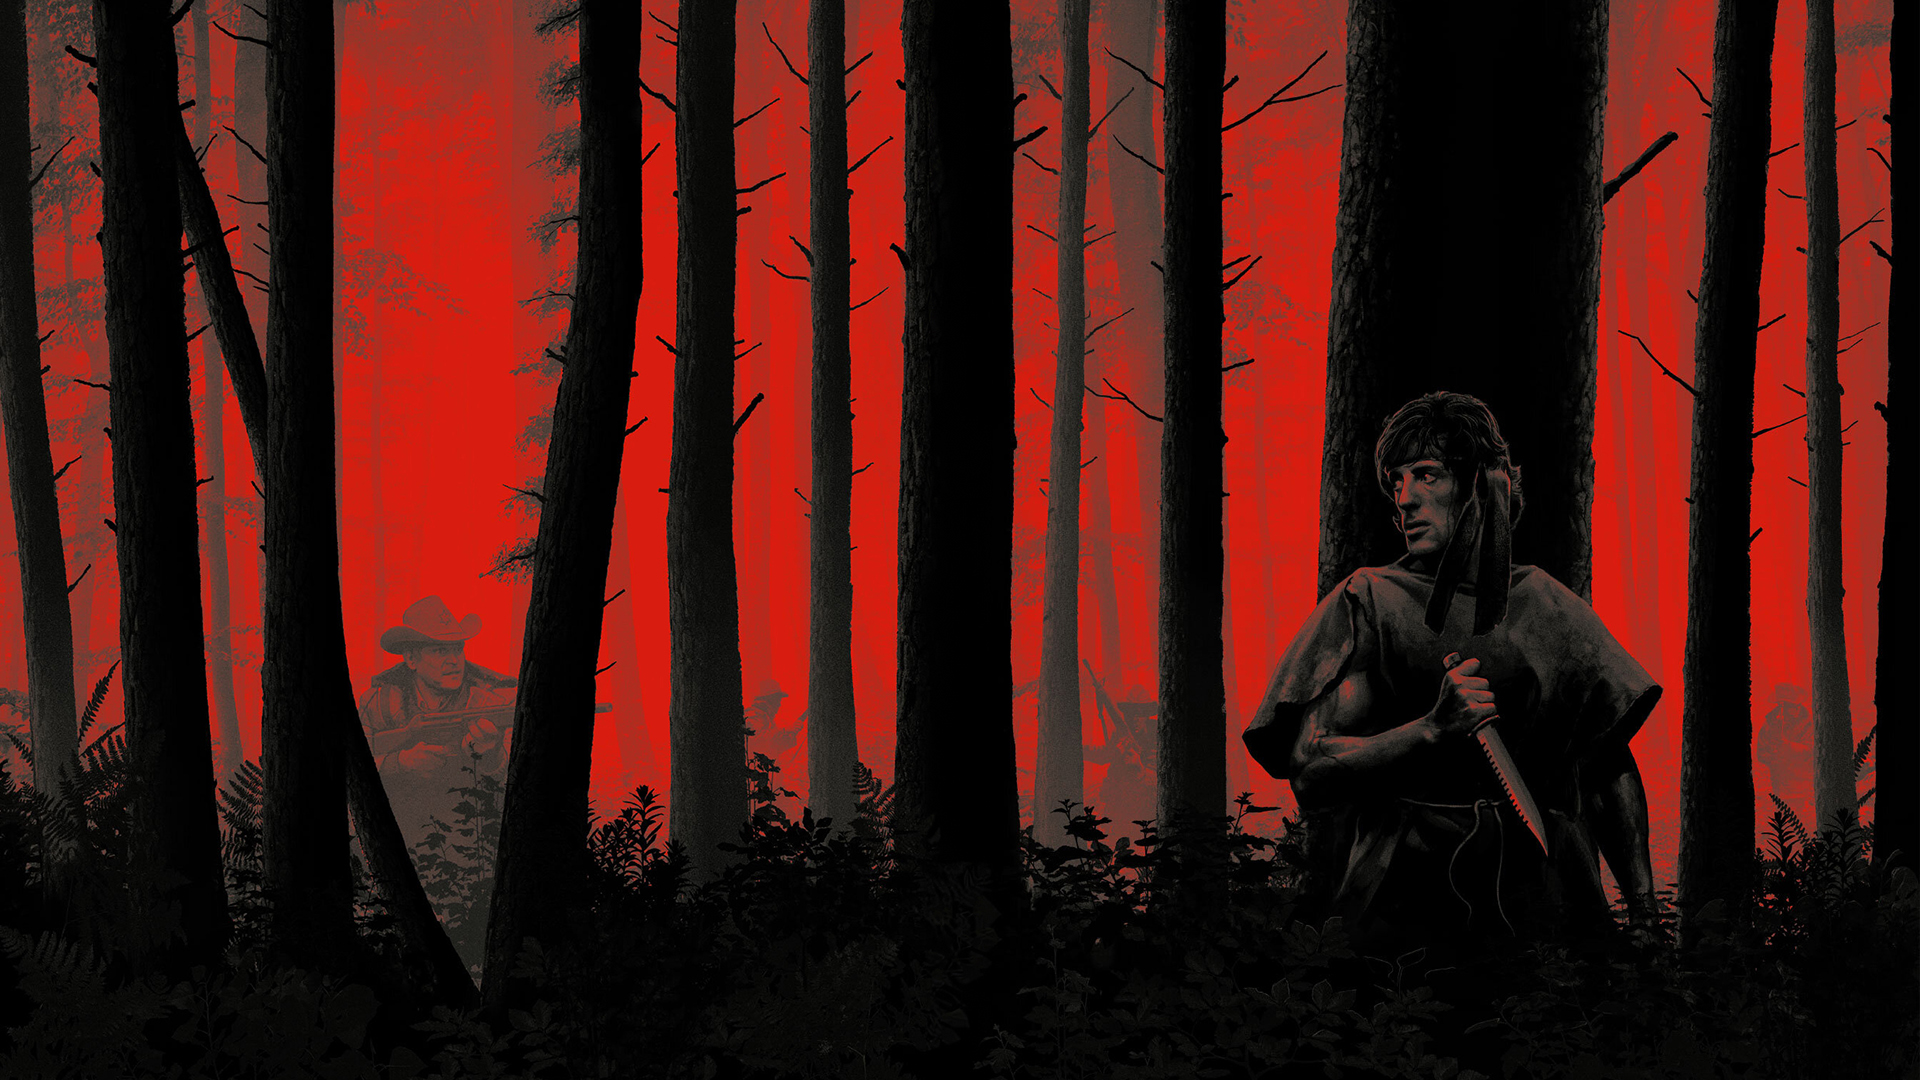 People 1920x1080 Rambo movies poster Sylvester Stallone actor knife forest trees sheriff Justin Erickson